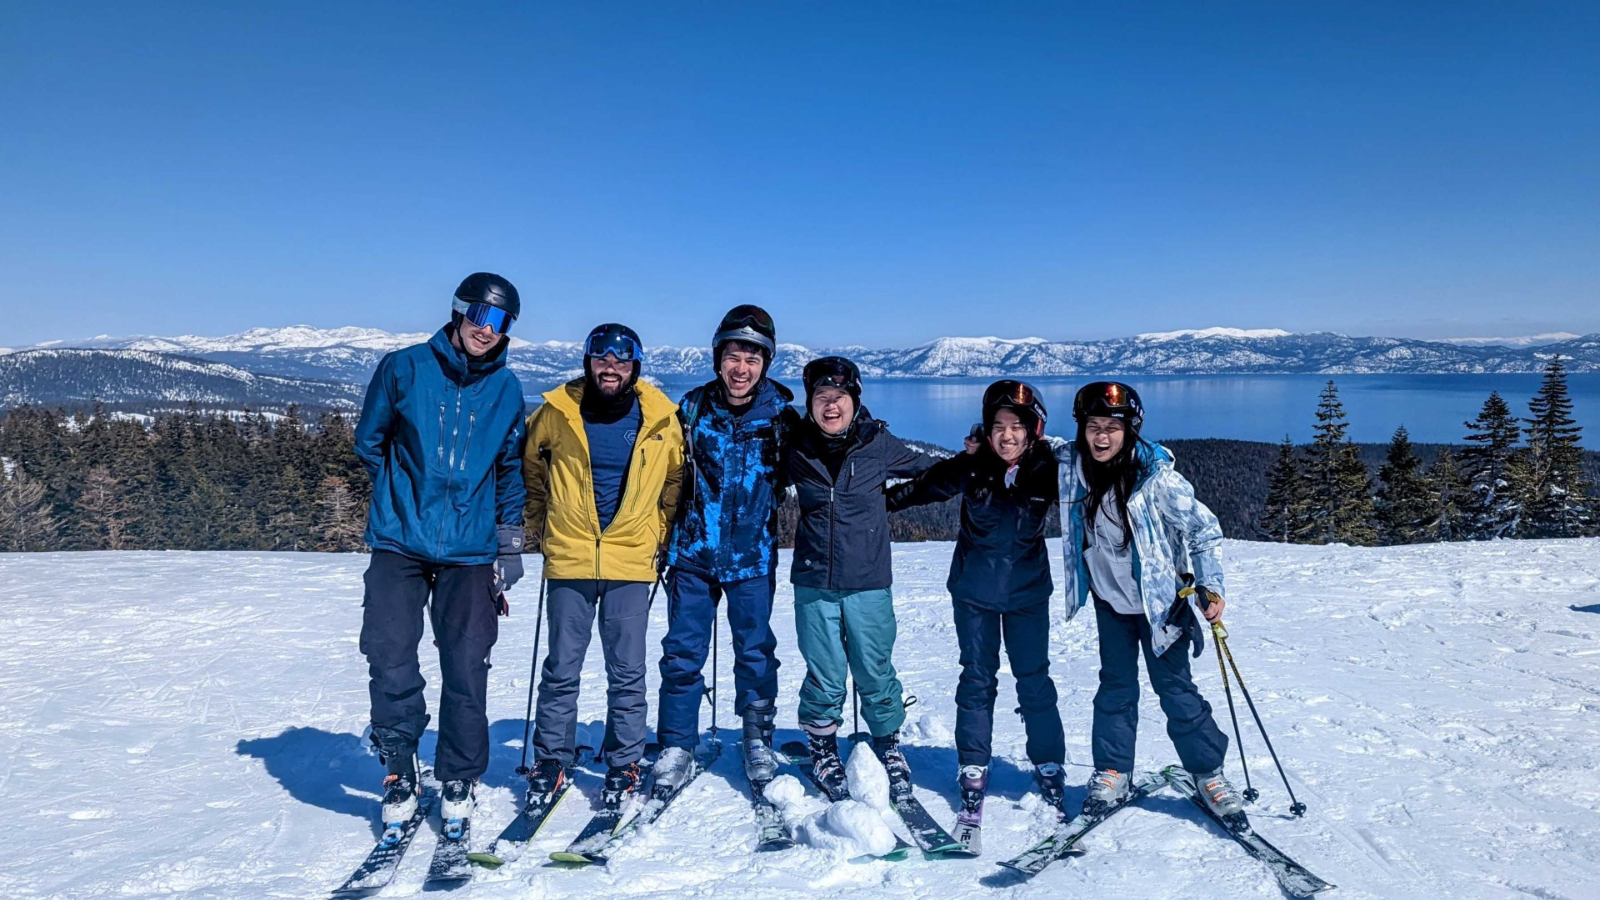 Group photo of Medra staff and Waterloo co-op students on a ski trip